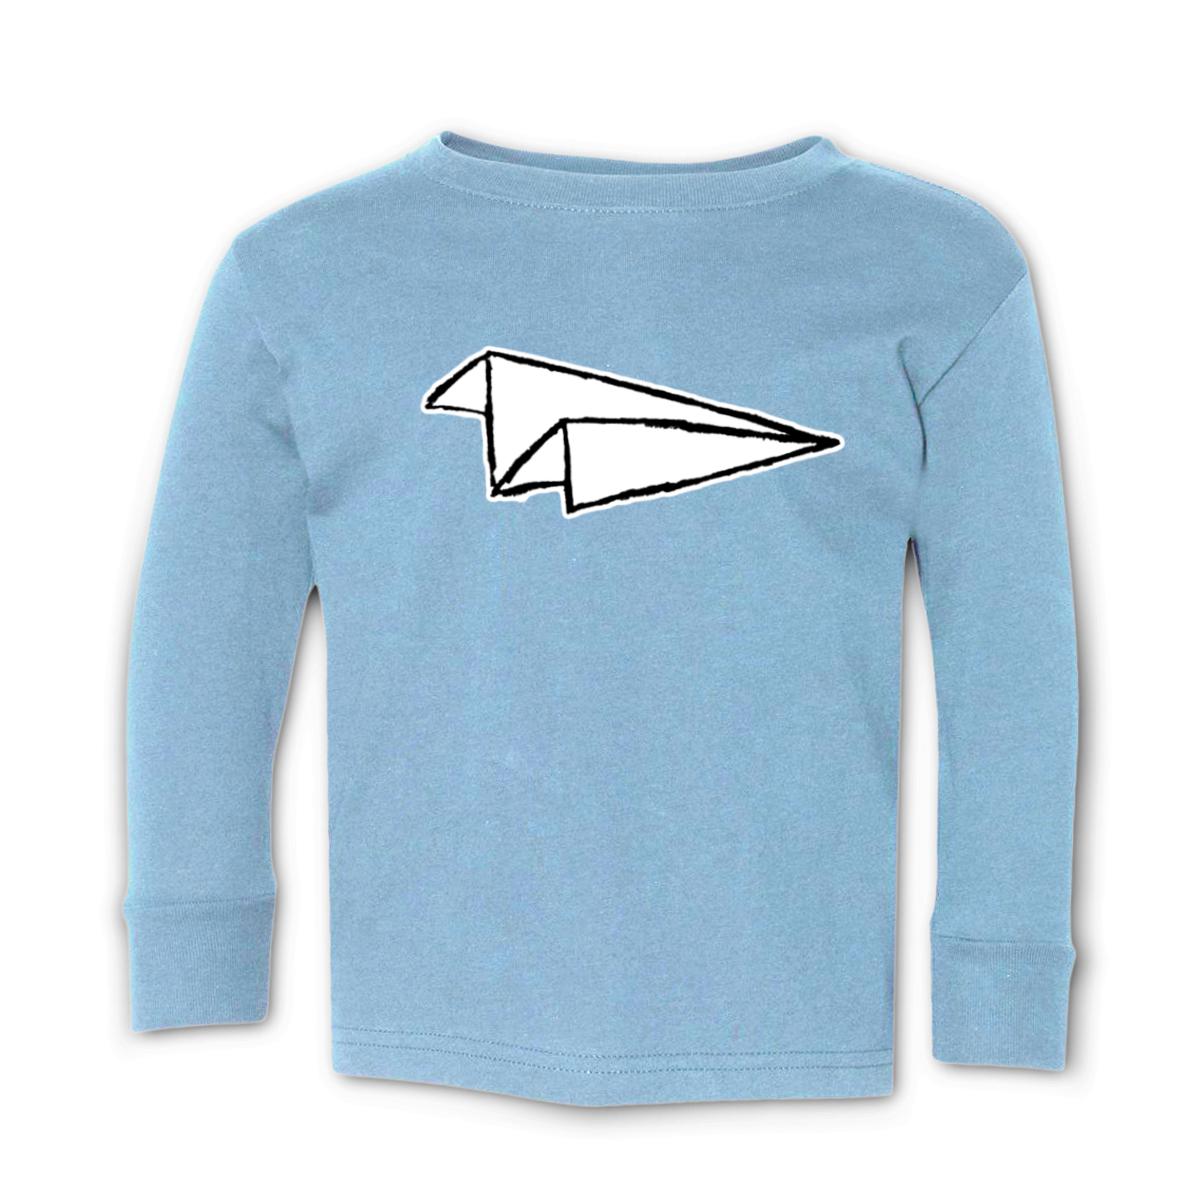 Airplane Sketch Toddler Long Sleeve Tee 56T light-blue